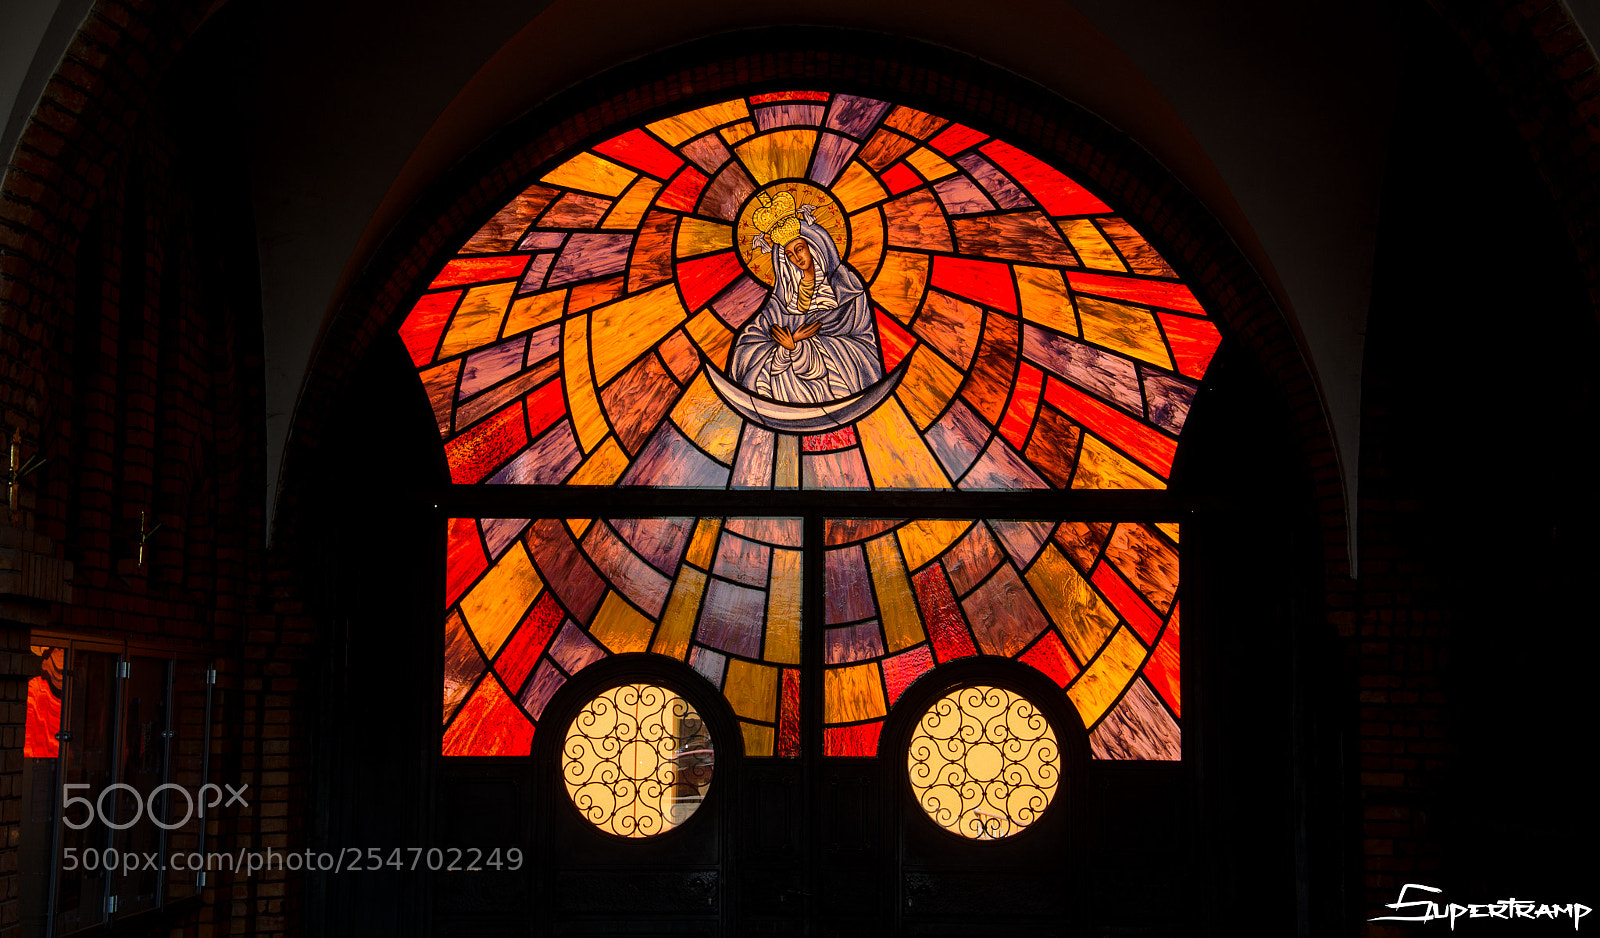 Nikon D7000 sample photo. Tarnow stained glass photography